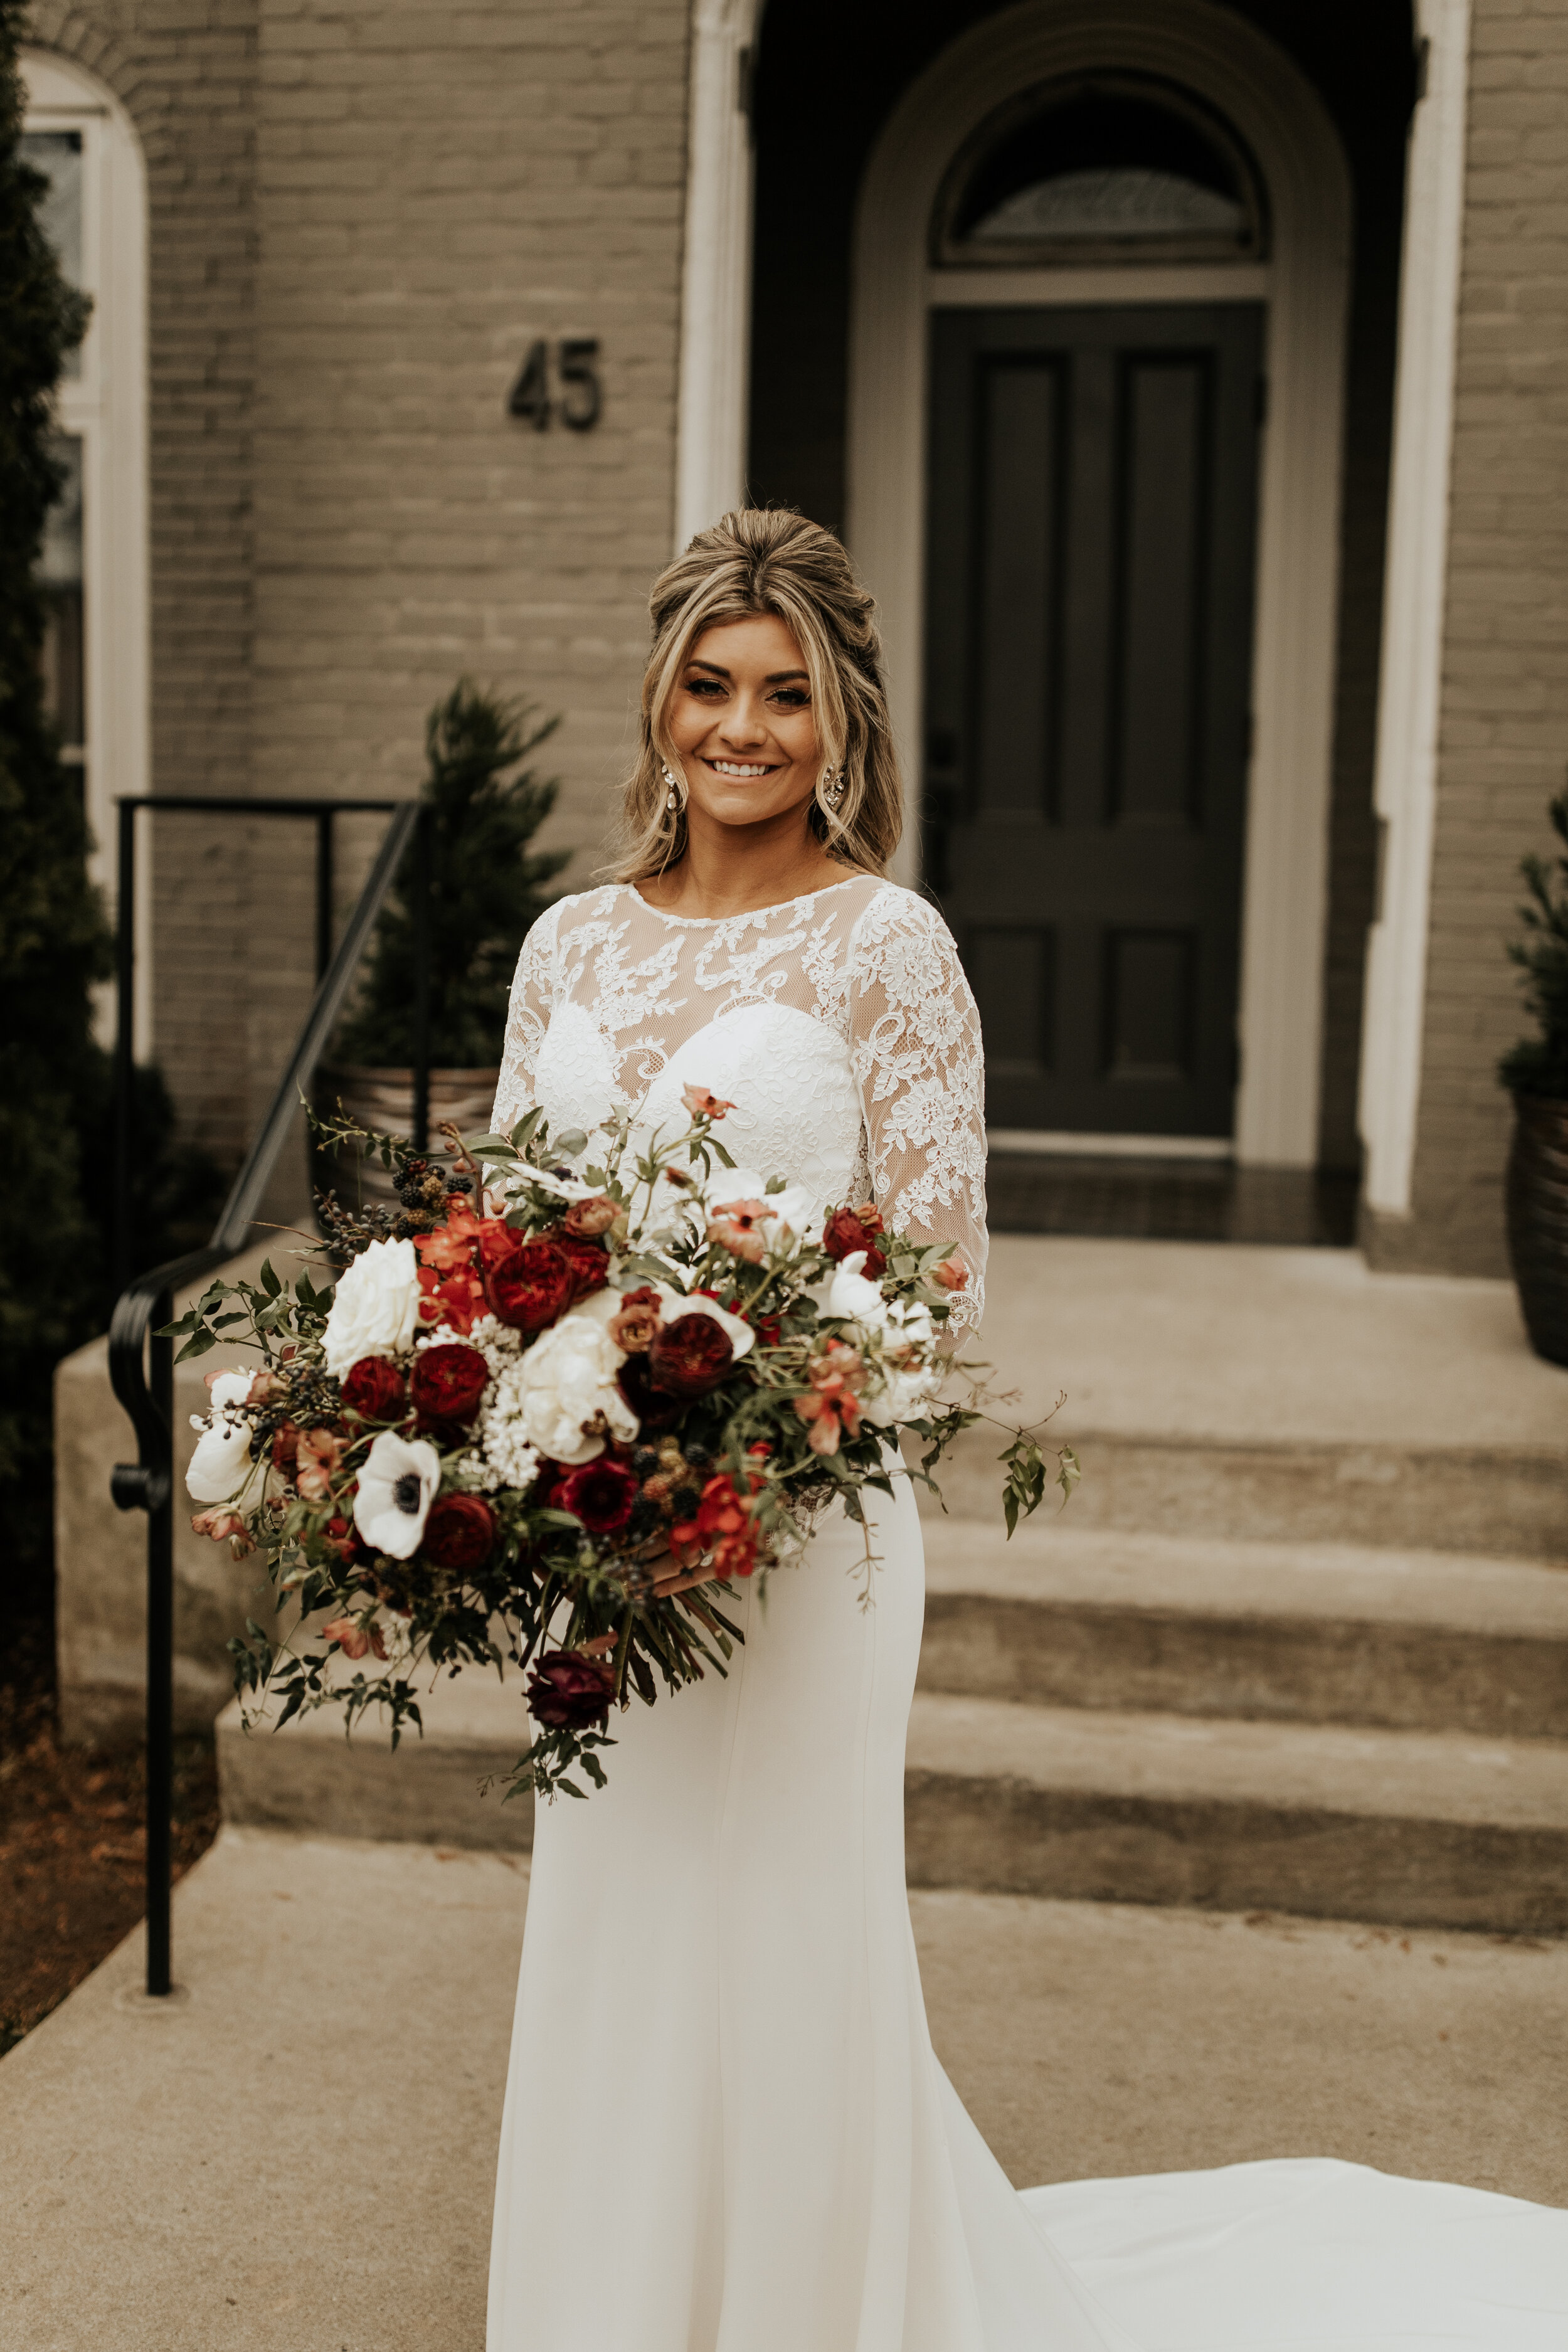 Lush, wintry bridal bouquet with anemones, white and burgundy peonies, ranunculus, garden roses, jasmine vine, and natural greenery. Nashville wedding floral designer, Rosemary & Finch.